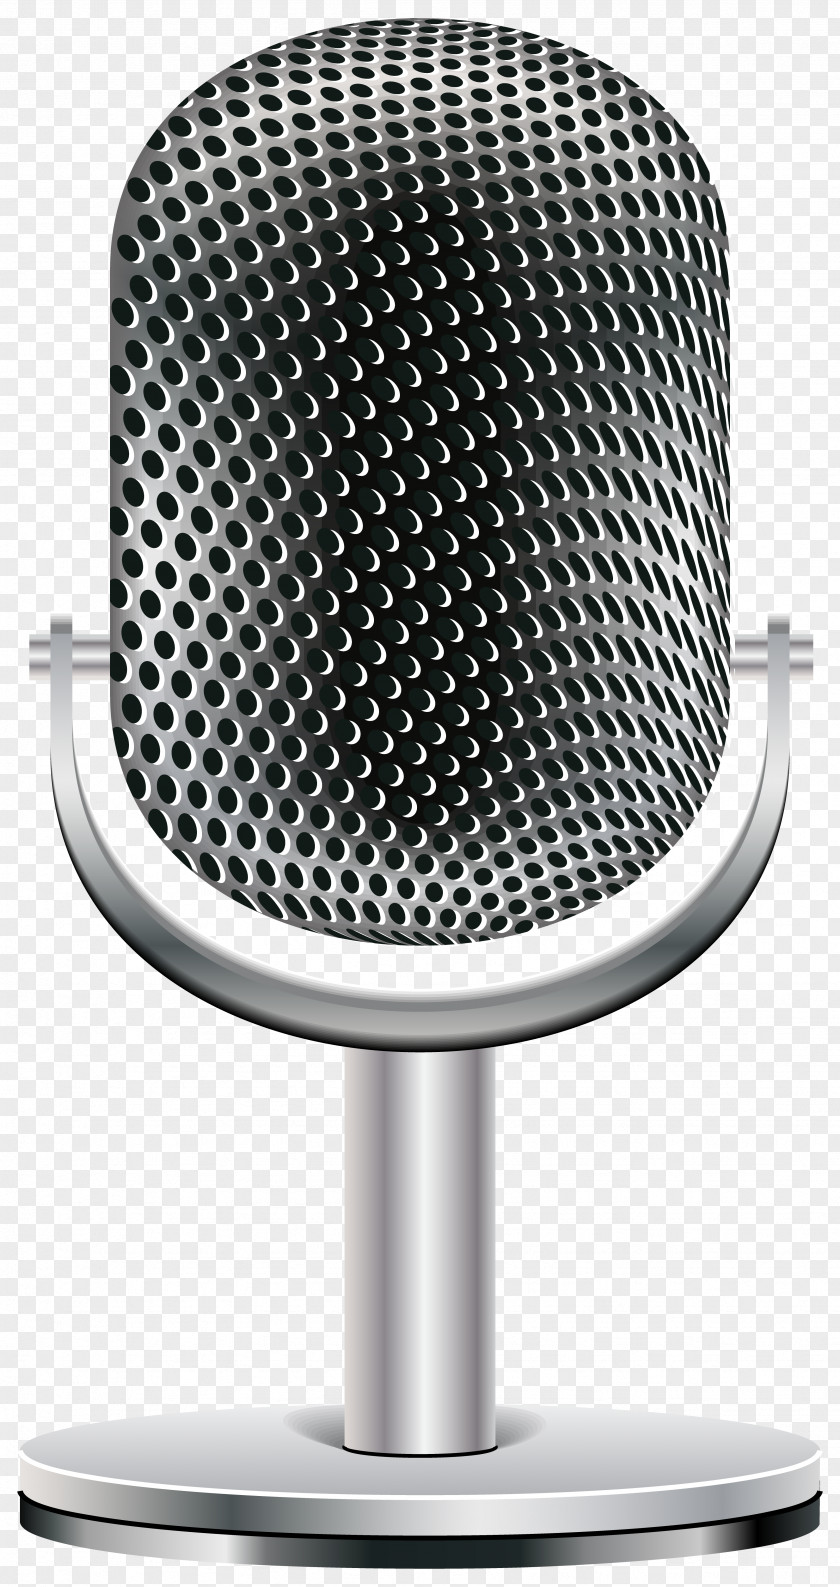 Microphone Clip Art Transparency Image PNG